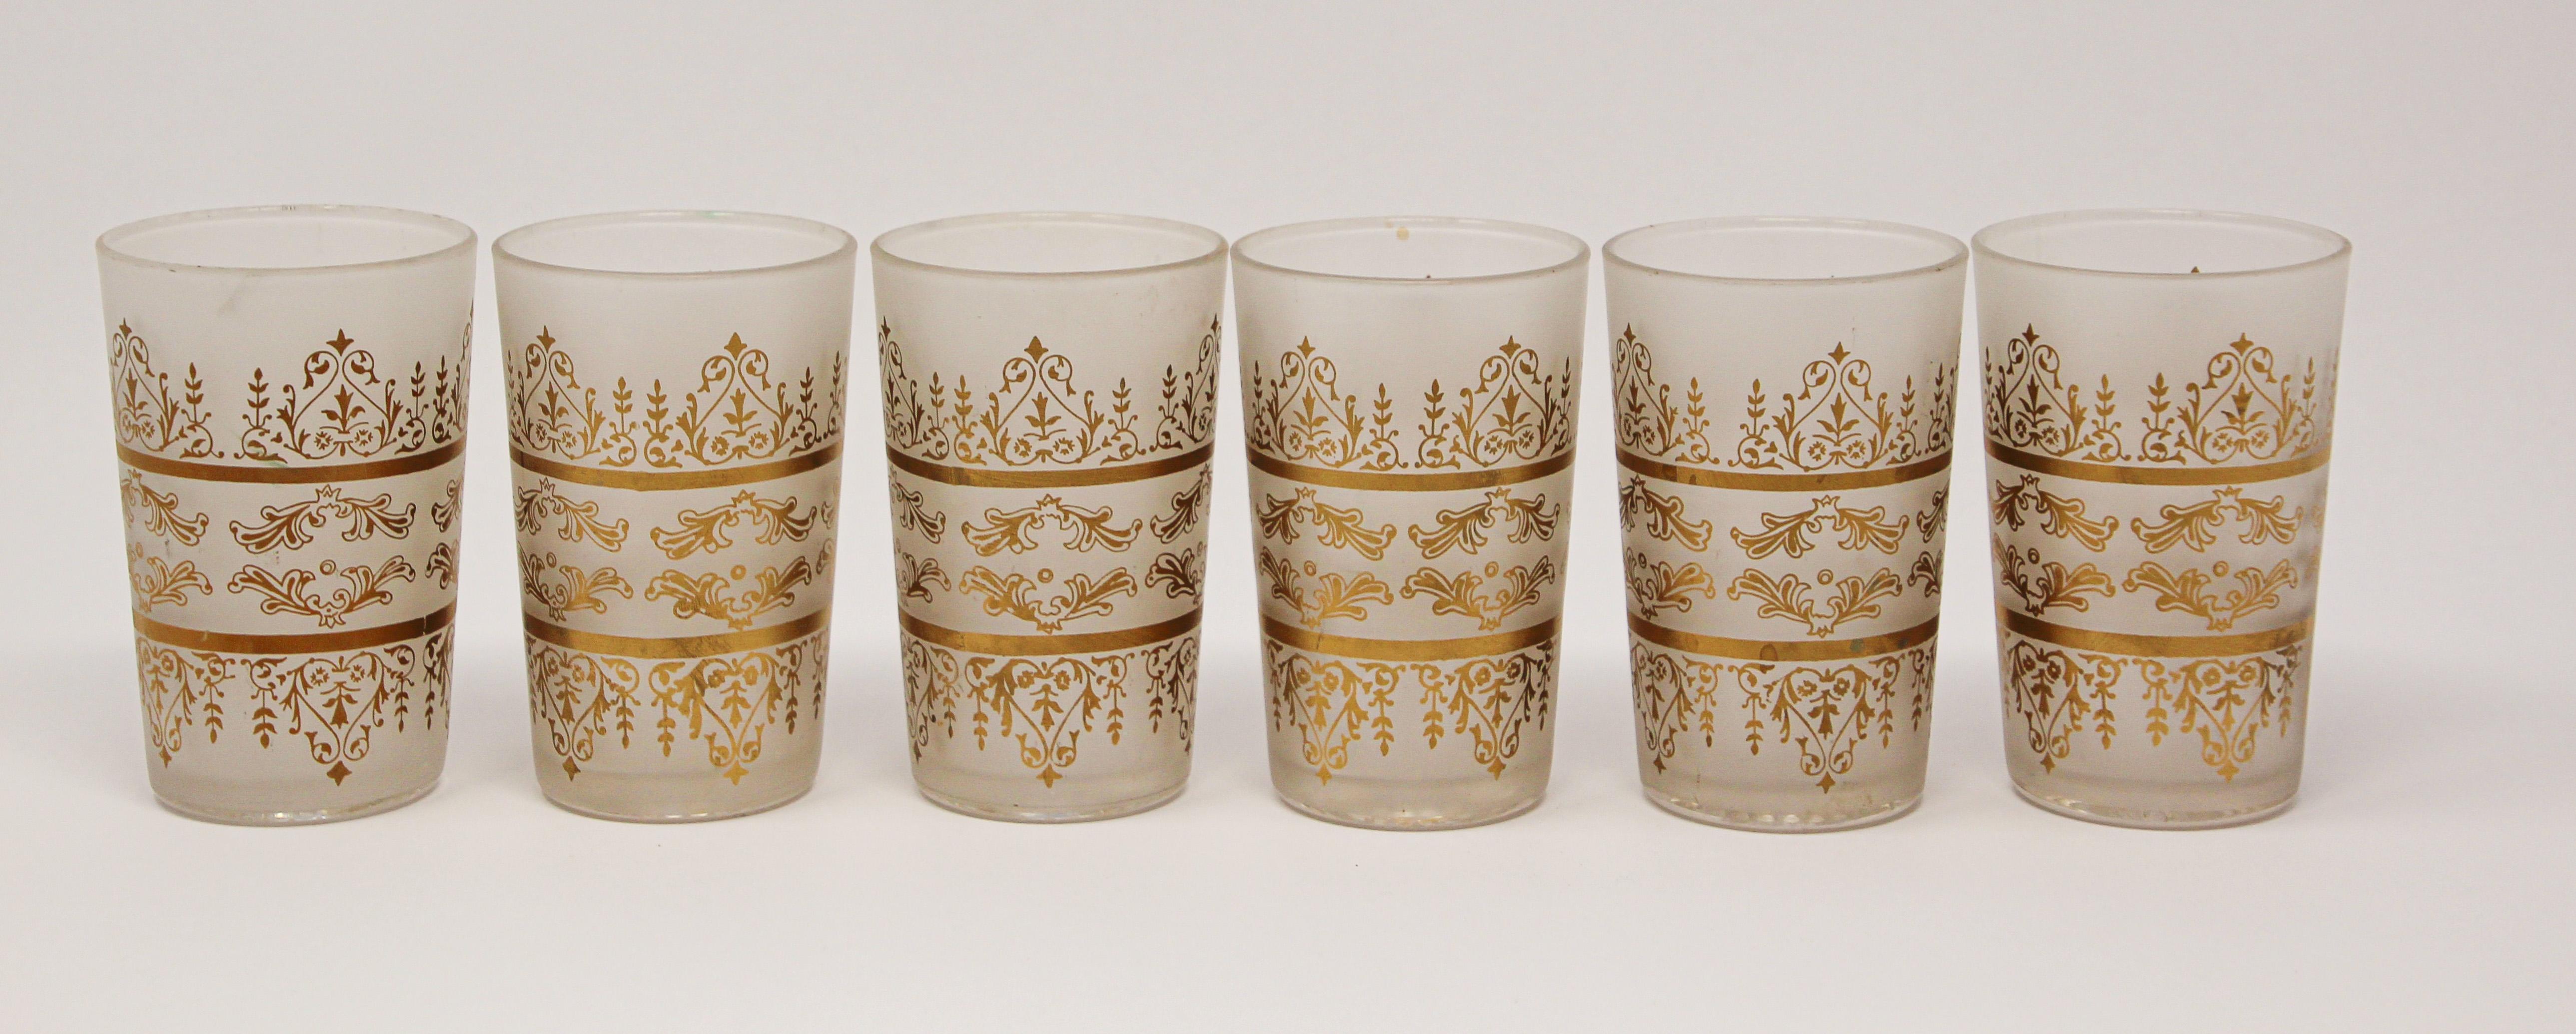 Moroccan Moorish White Frosted and Gold Glasses Set of 6 In Good Condition For Sale In North Hollywood, CA